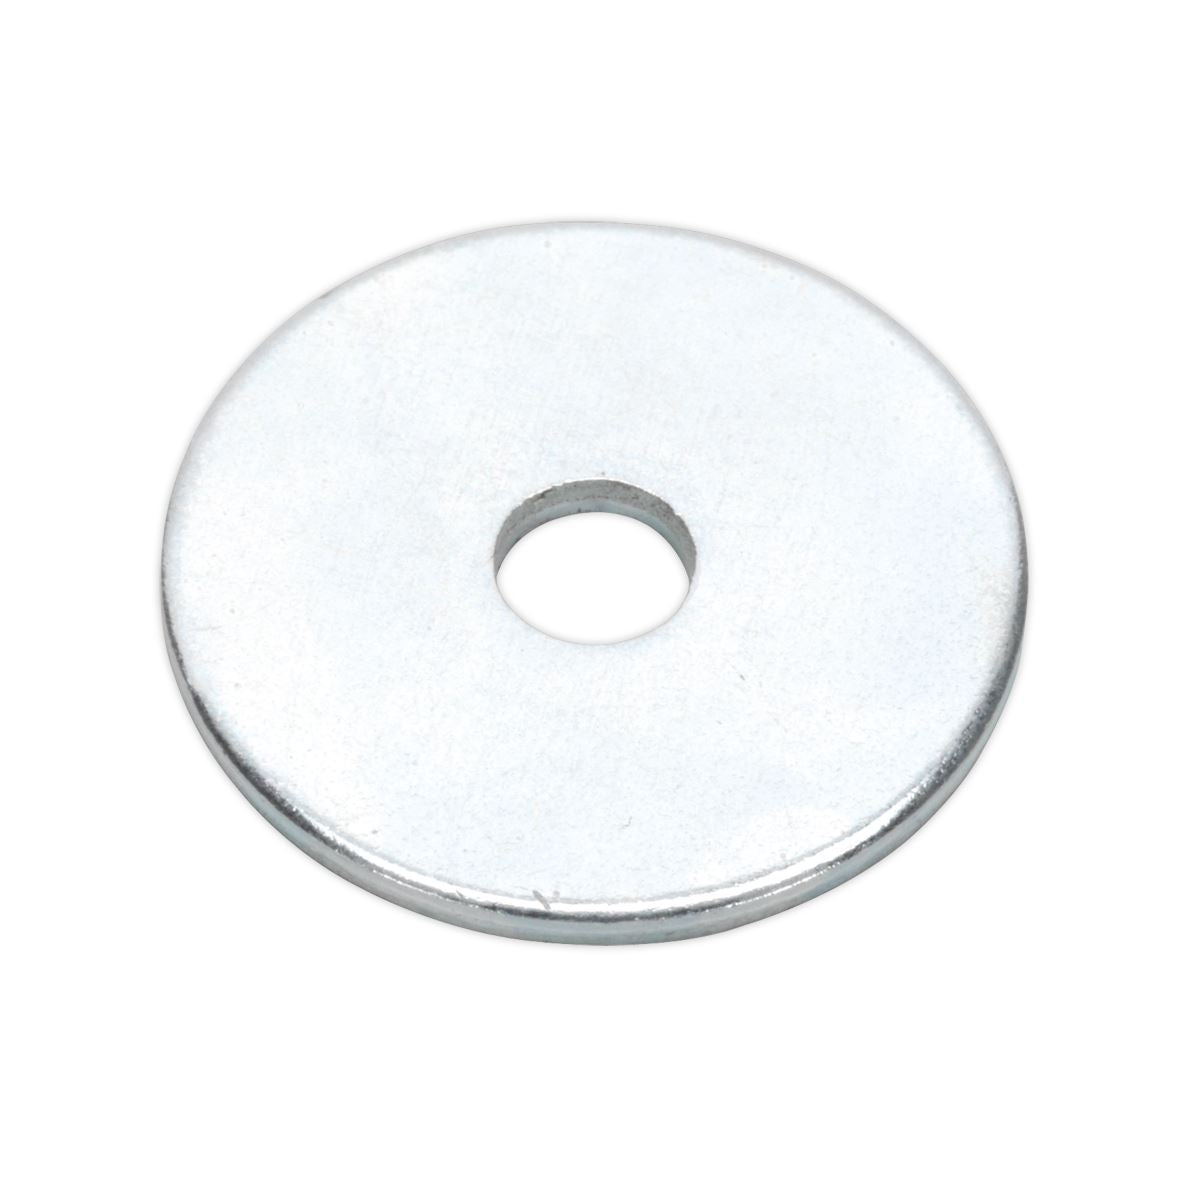 Sealey Repair Washer M5 x 19mm Zinc Plated Pack of 100